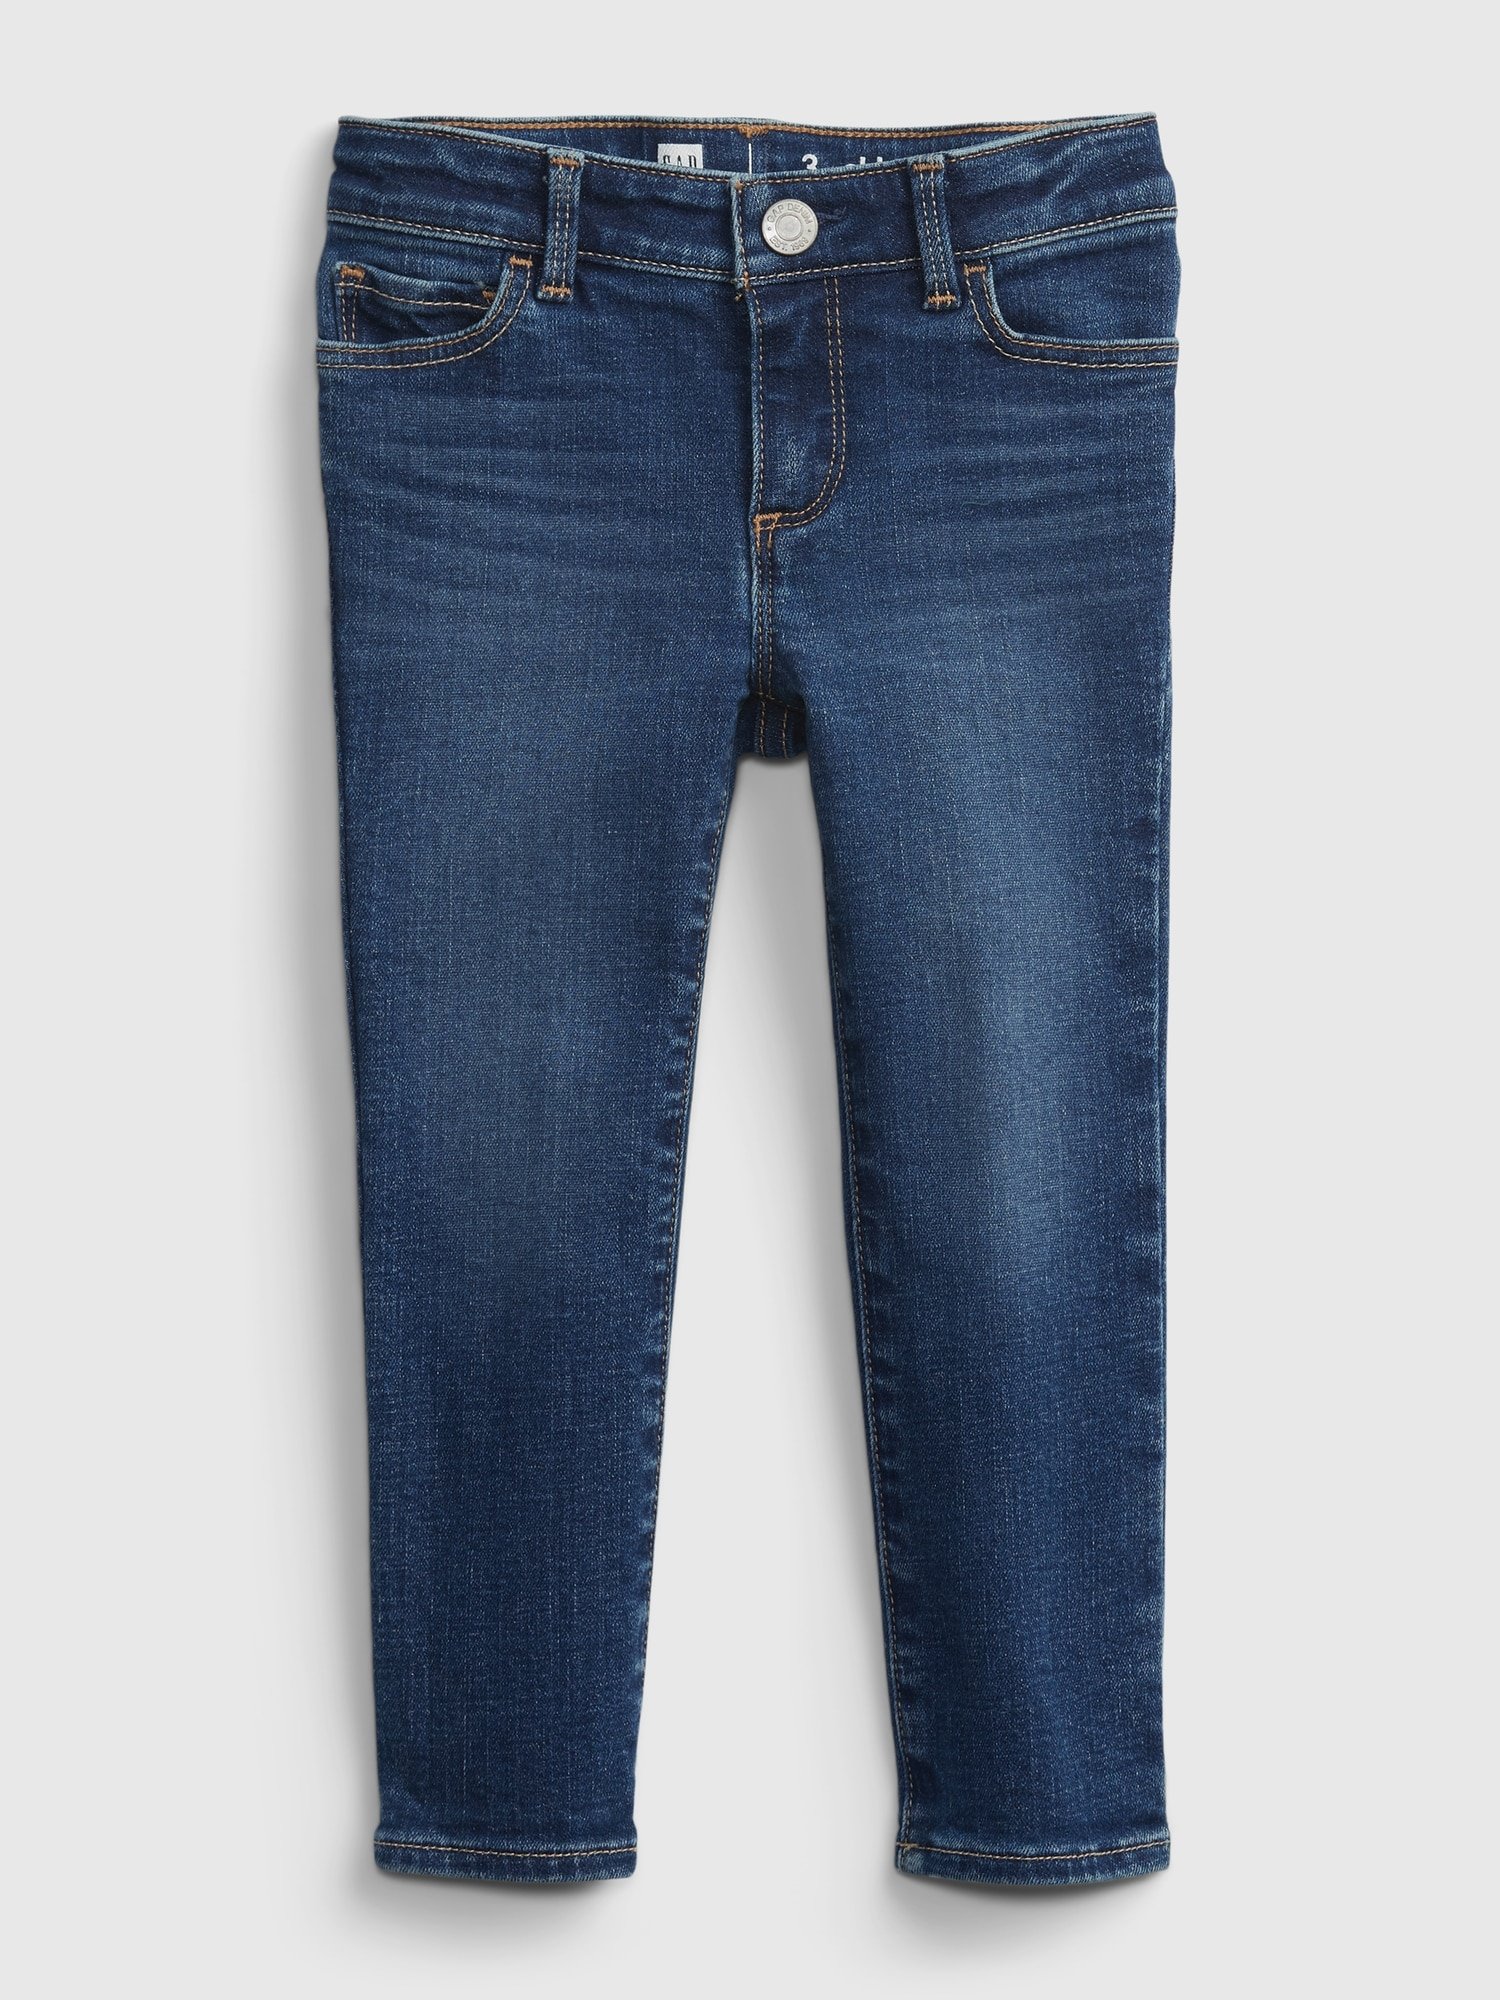 Skinny Fit Jean product image